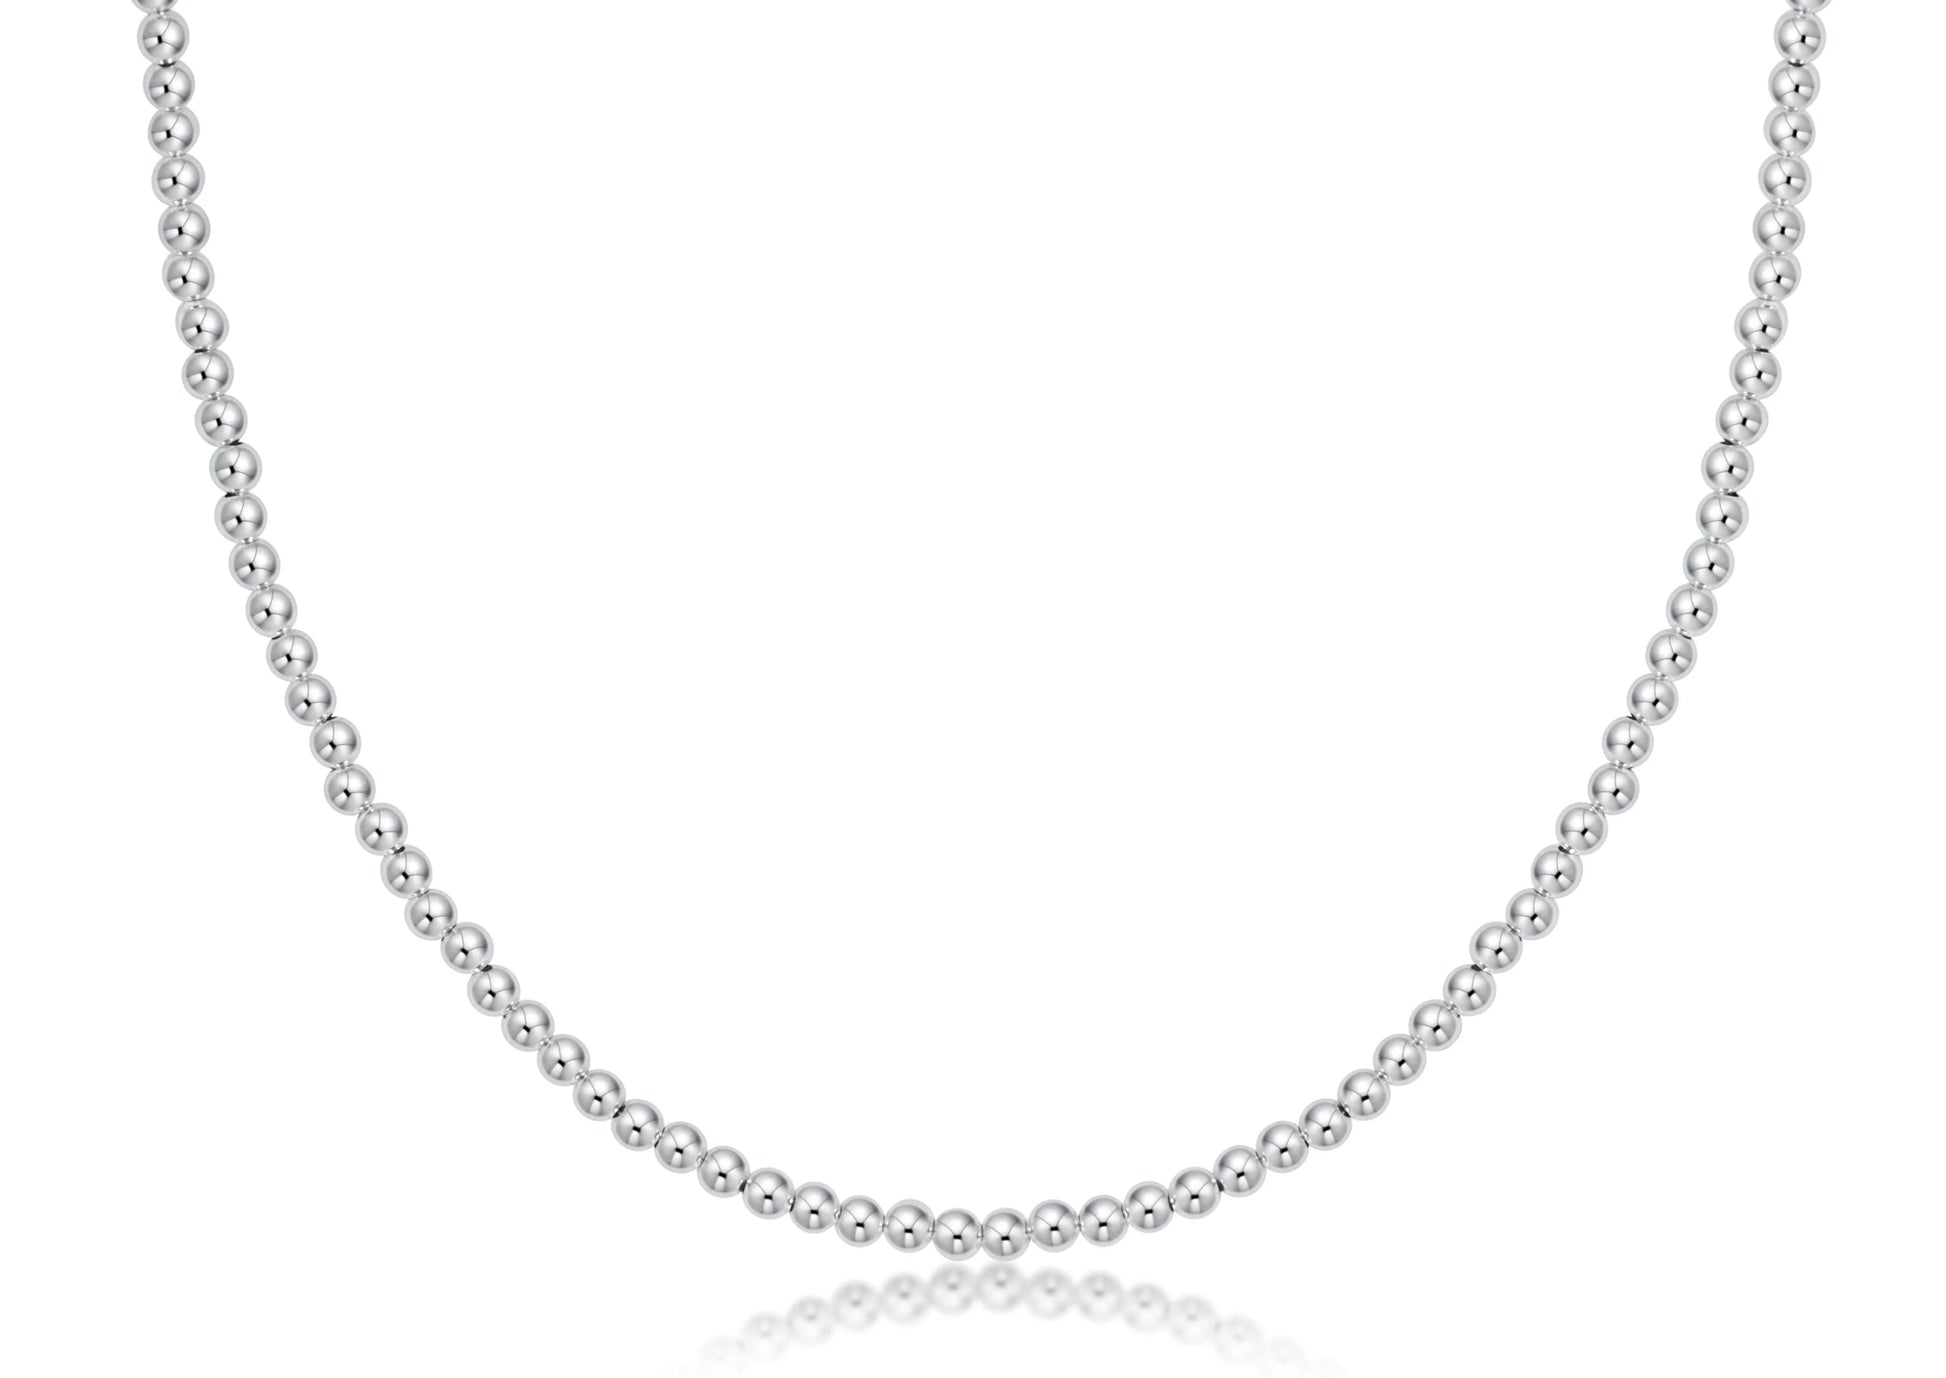 Choker Classic Sterling 3mm beaded chain by eNewton. 15"-17" in length. Shop at The Painted Cottage in Edgewater, MD.